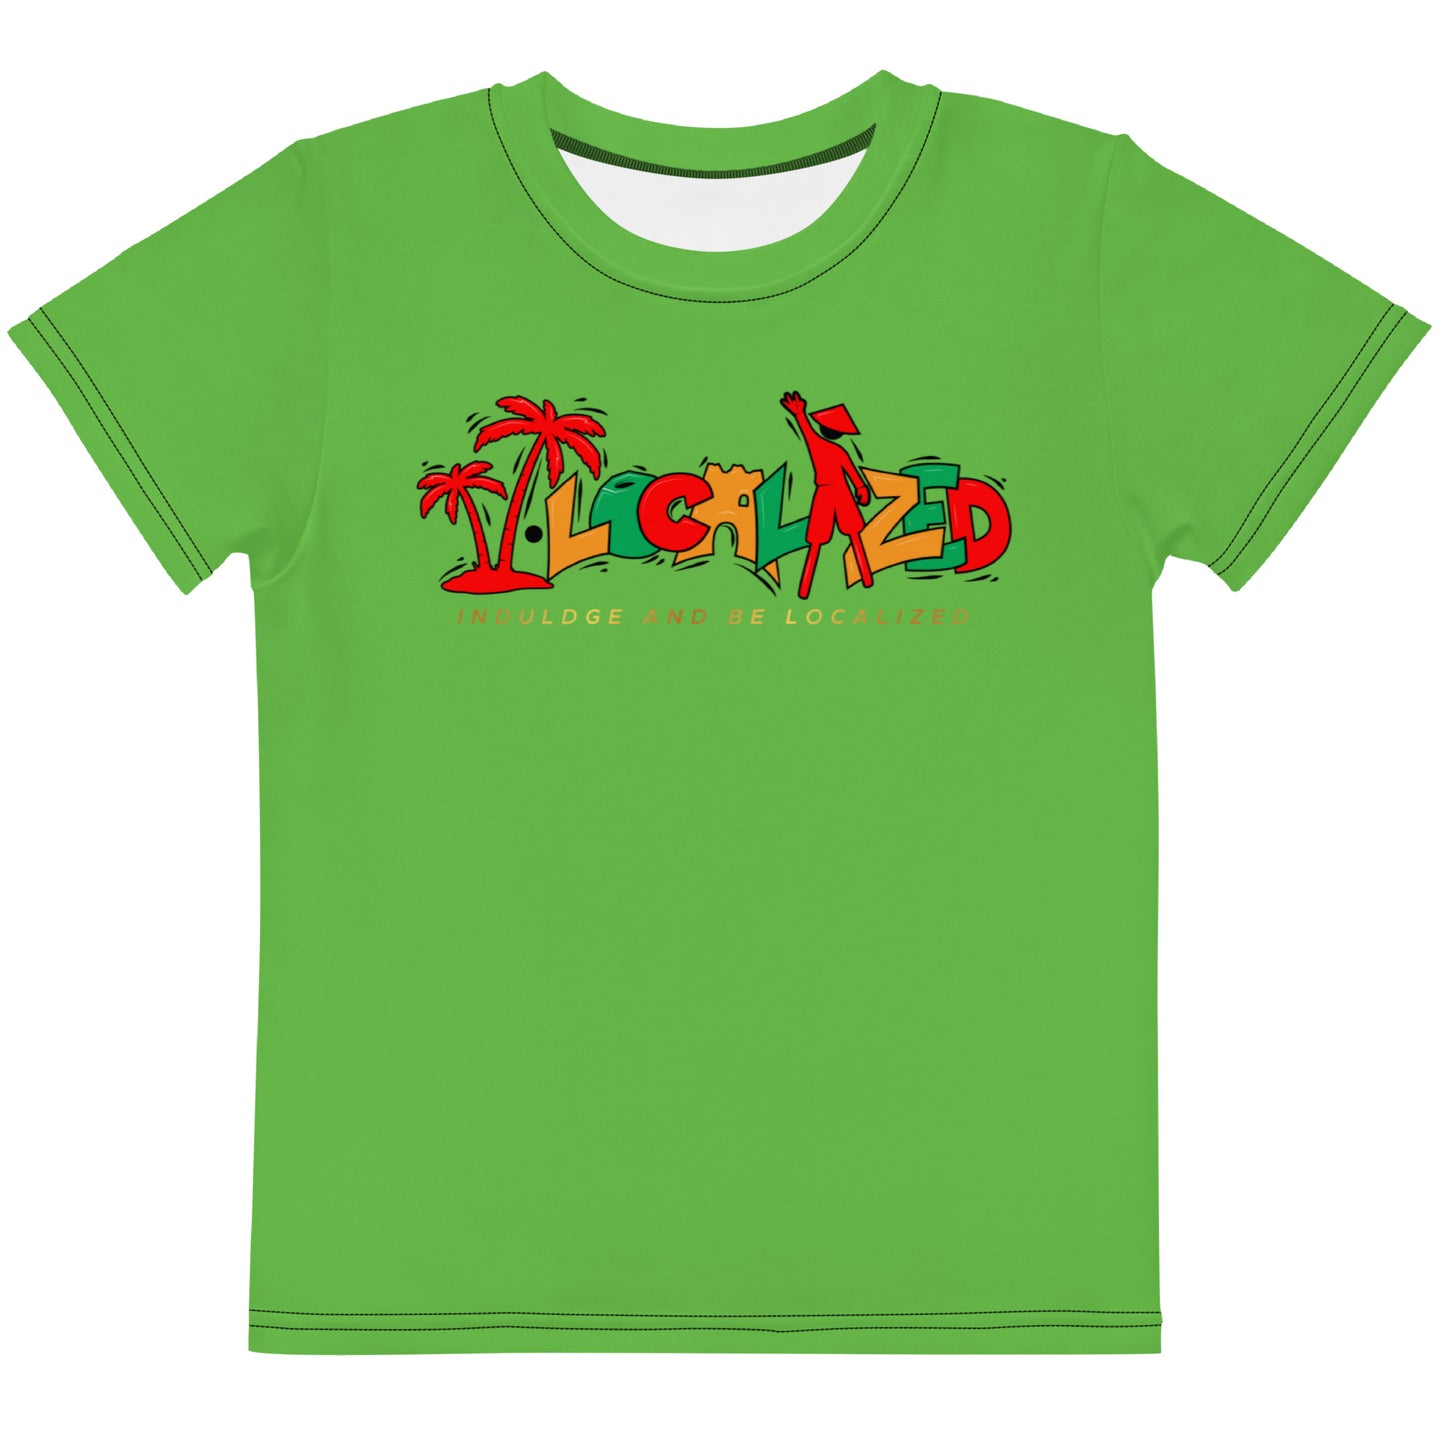 Green V.Localized (Ice/Gold/Green) Dry-Fit Kids  T-Shirt